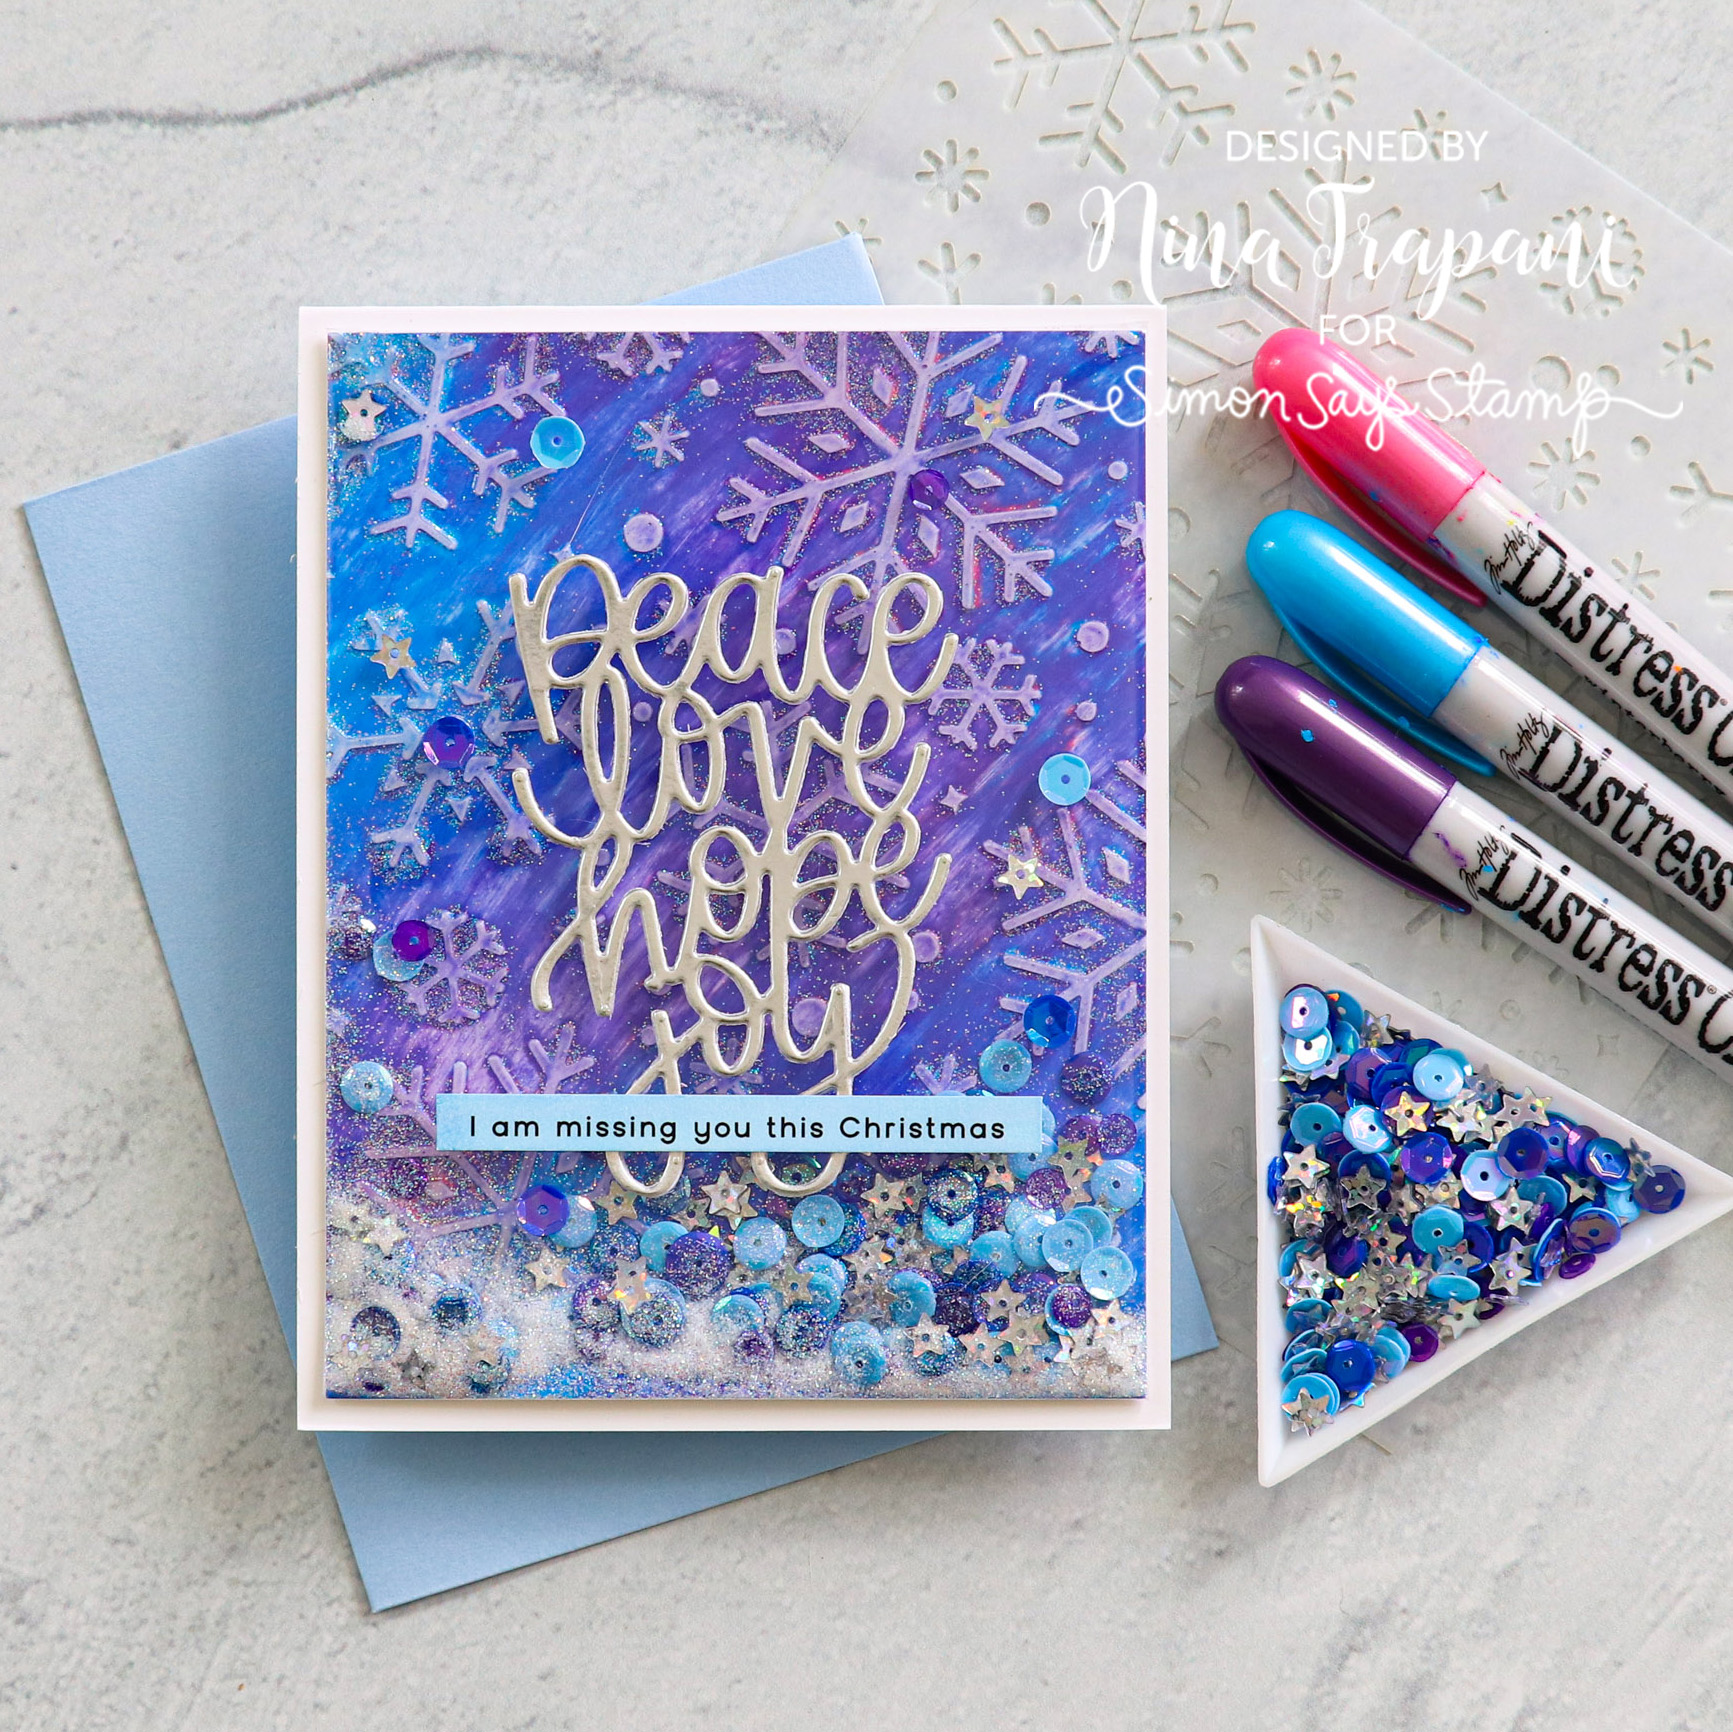 Distress Crayon Resist on Glossy Cardstock + New Crayons from Tim Holtz! -  Nina-Marie Design